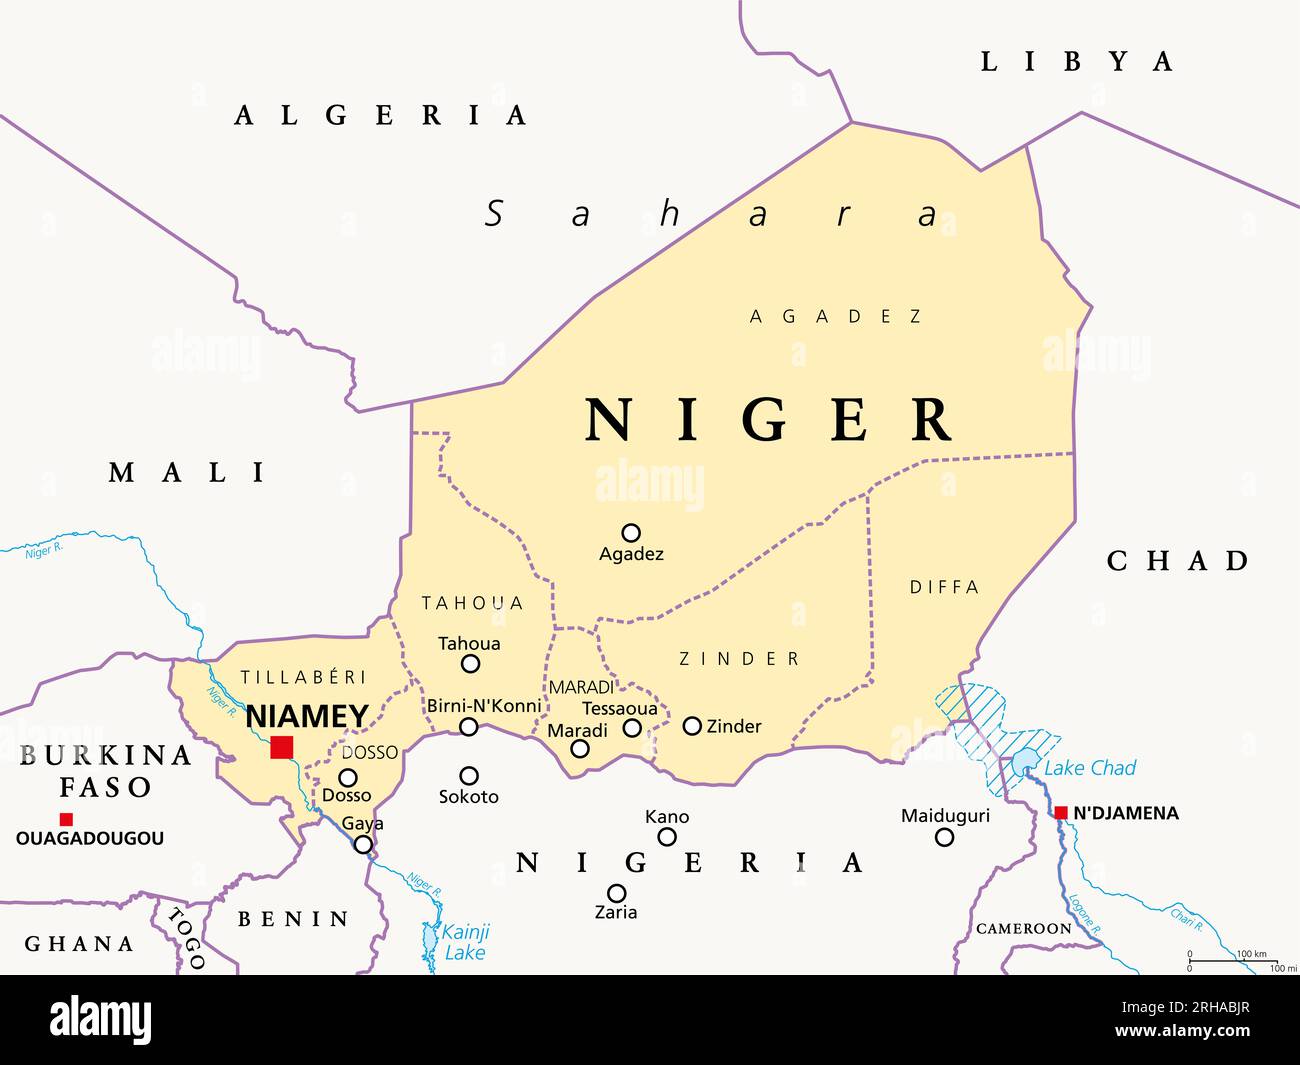 Republic of the Niger, a landlocked country and unitary state in West Africa. Political map with borders, regions, capital Niamey and largest cities. Stock Photo